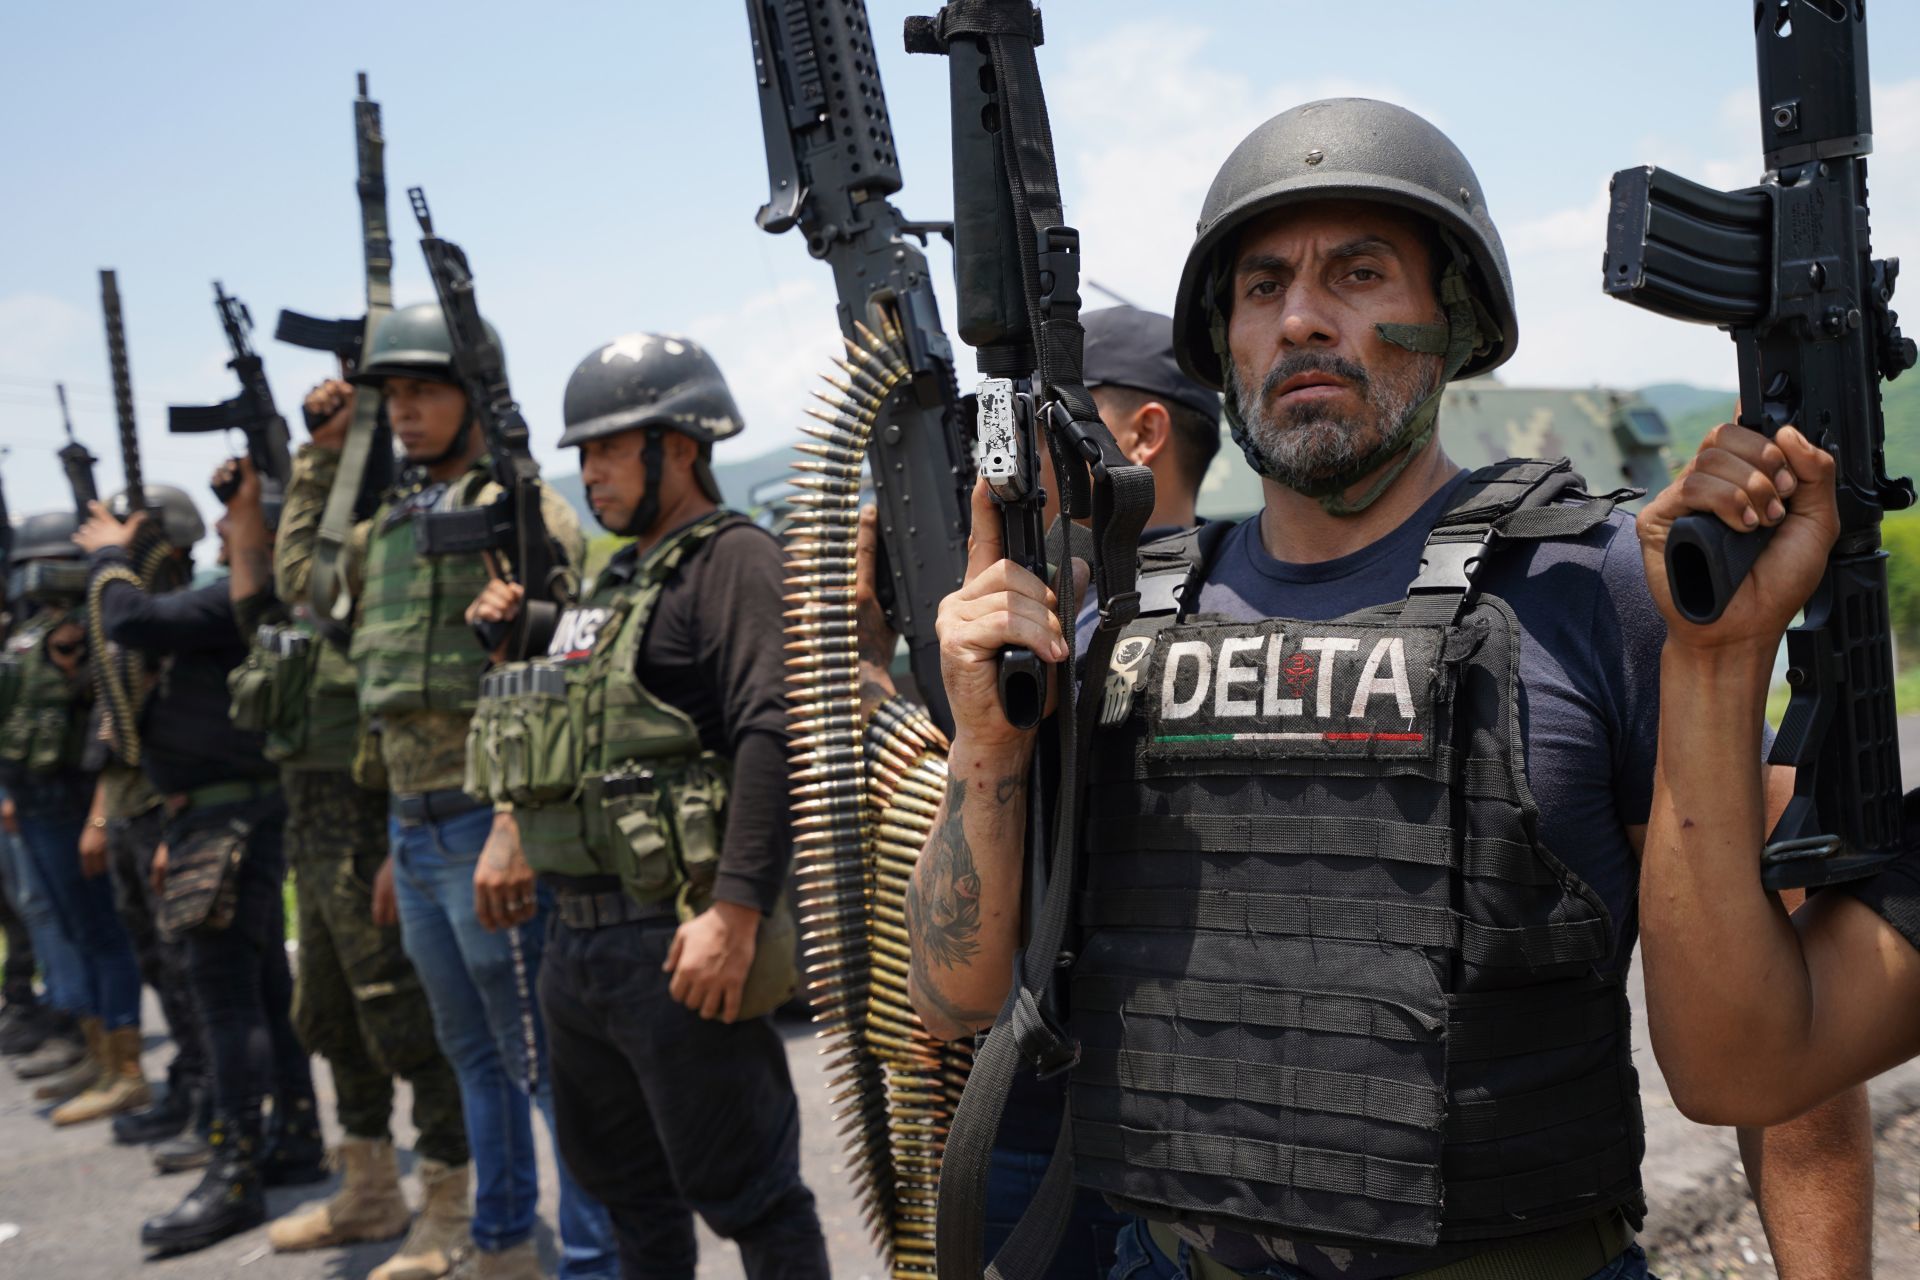 The Delta Group is the armed wing of the CJNG in the Aguililla area.  (DARKROOM)